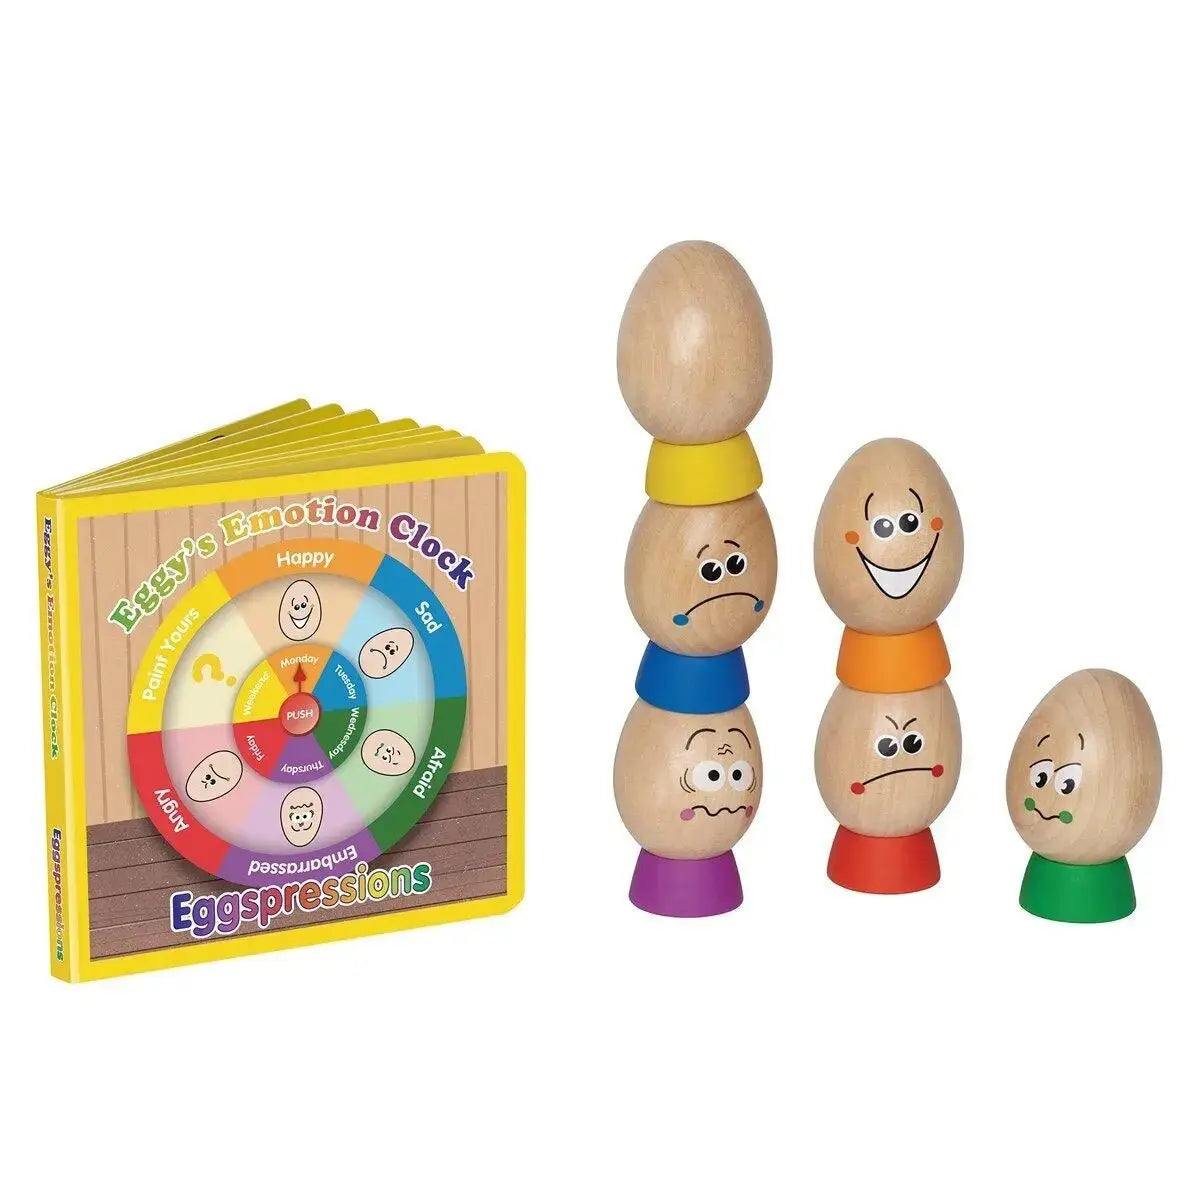 Eggspressions Wooden Learning Toy with Illustrative Book